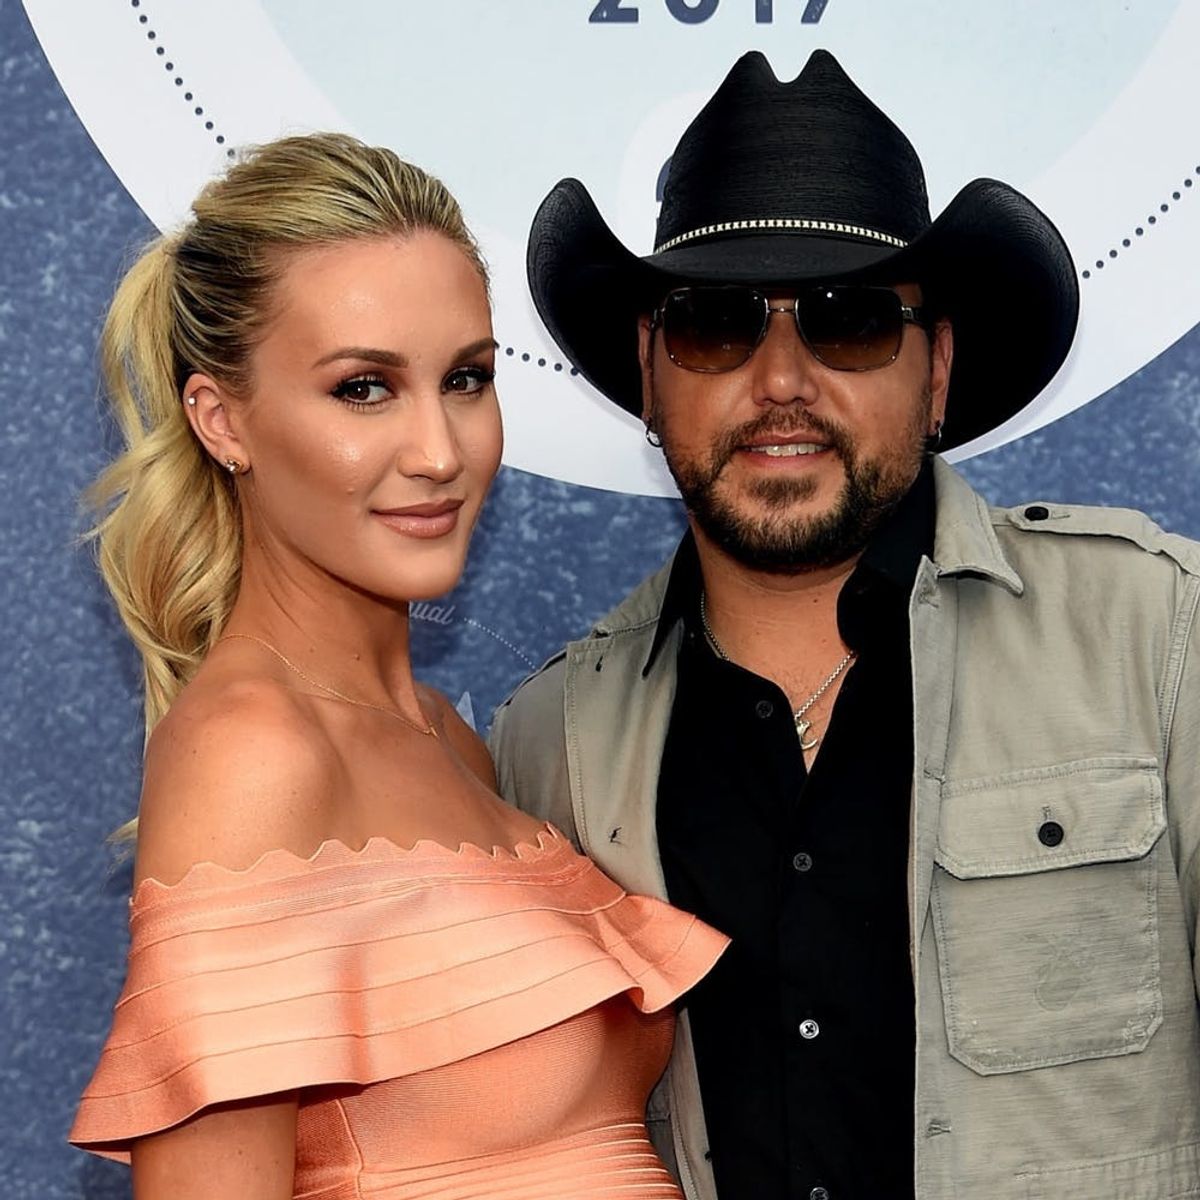 Jason Aldean and Wife Brittany Make an Emotional Return to Las Vegas to Visit Shooting Victims